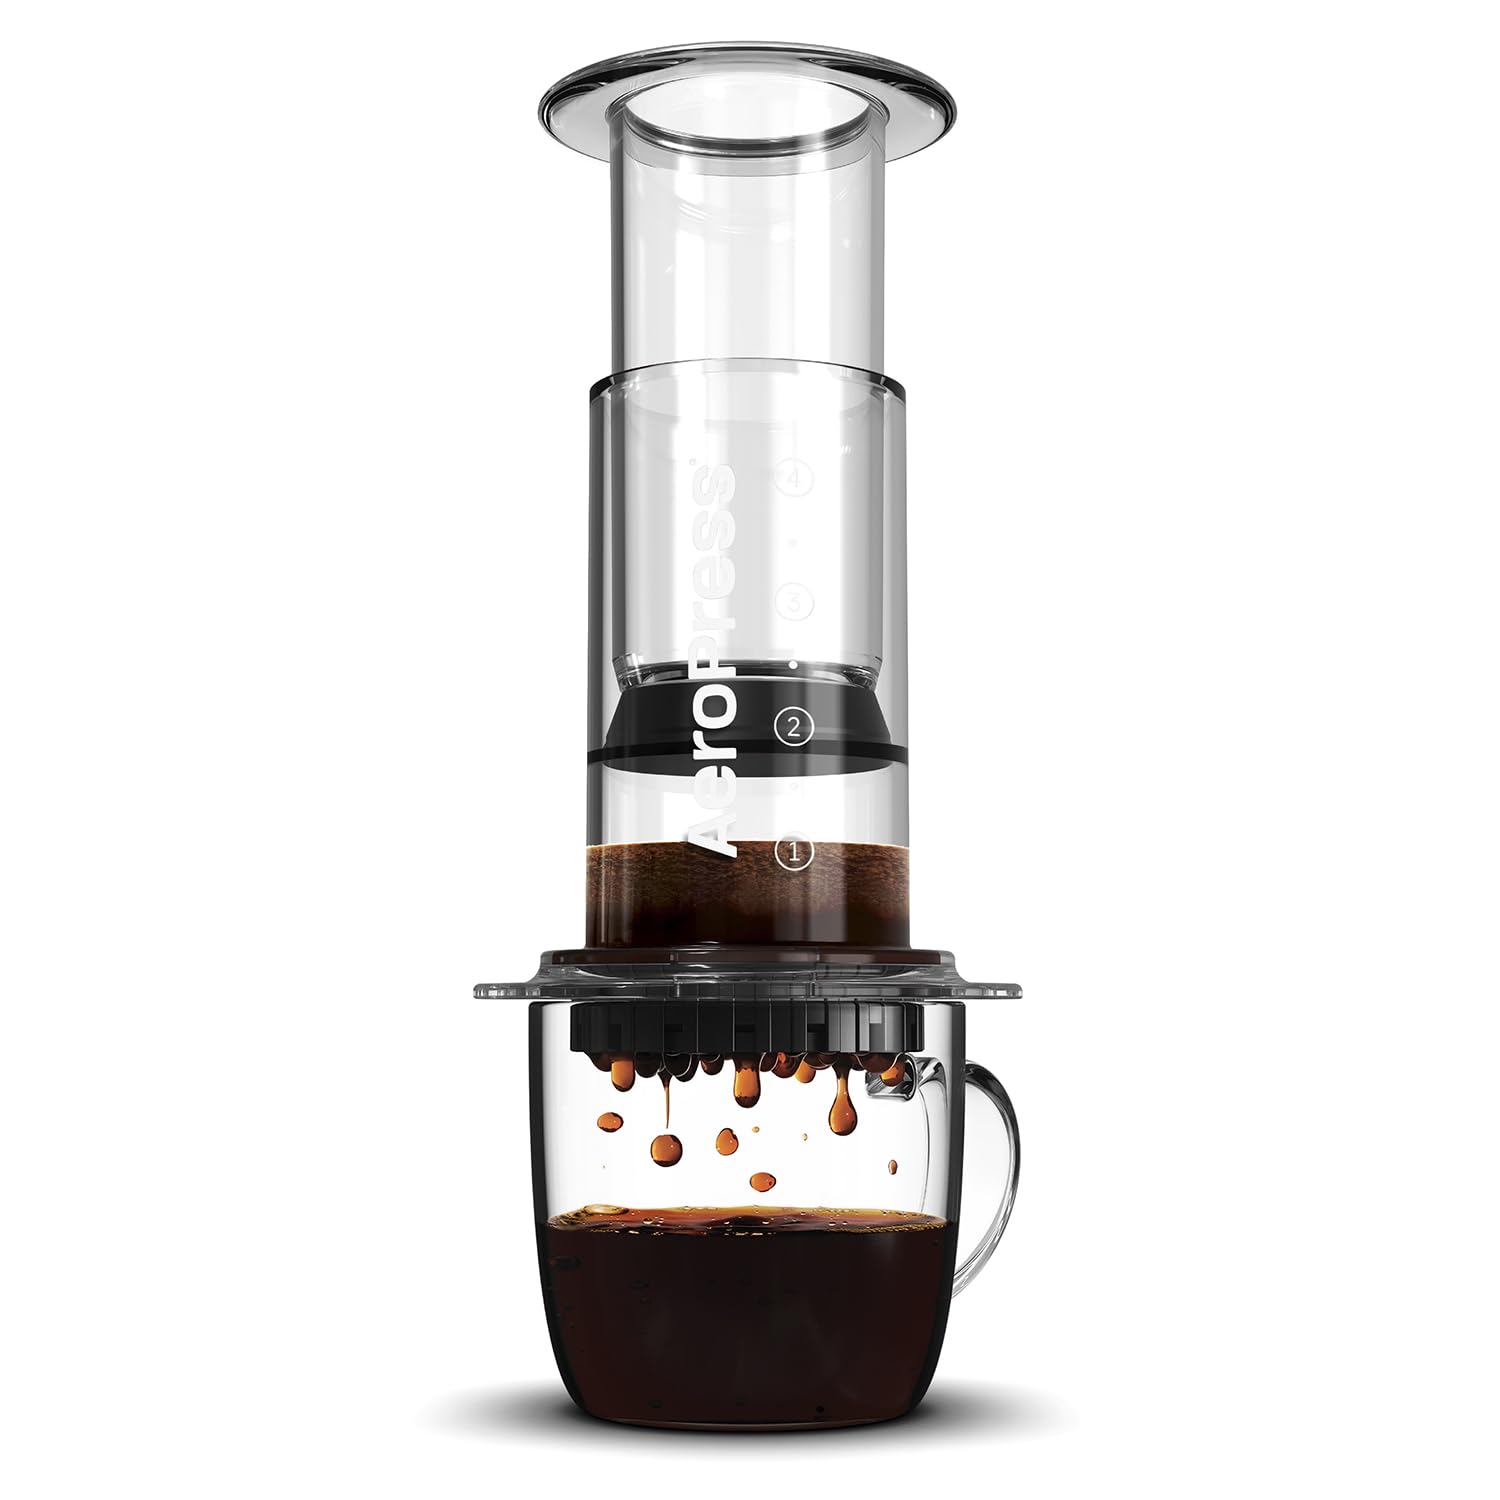 AeroPress Clear Coffee Press – 3 in 1 brew method combines French Press, Pourover, Espresso - Full bodied coffee without grit or bitterness - Small portable coffee maker for camping & travel